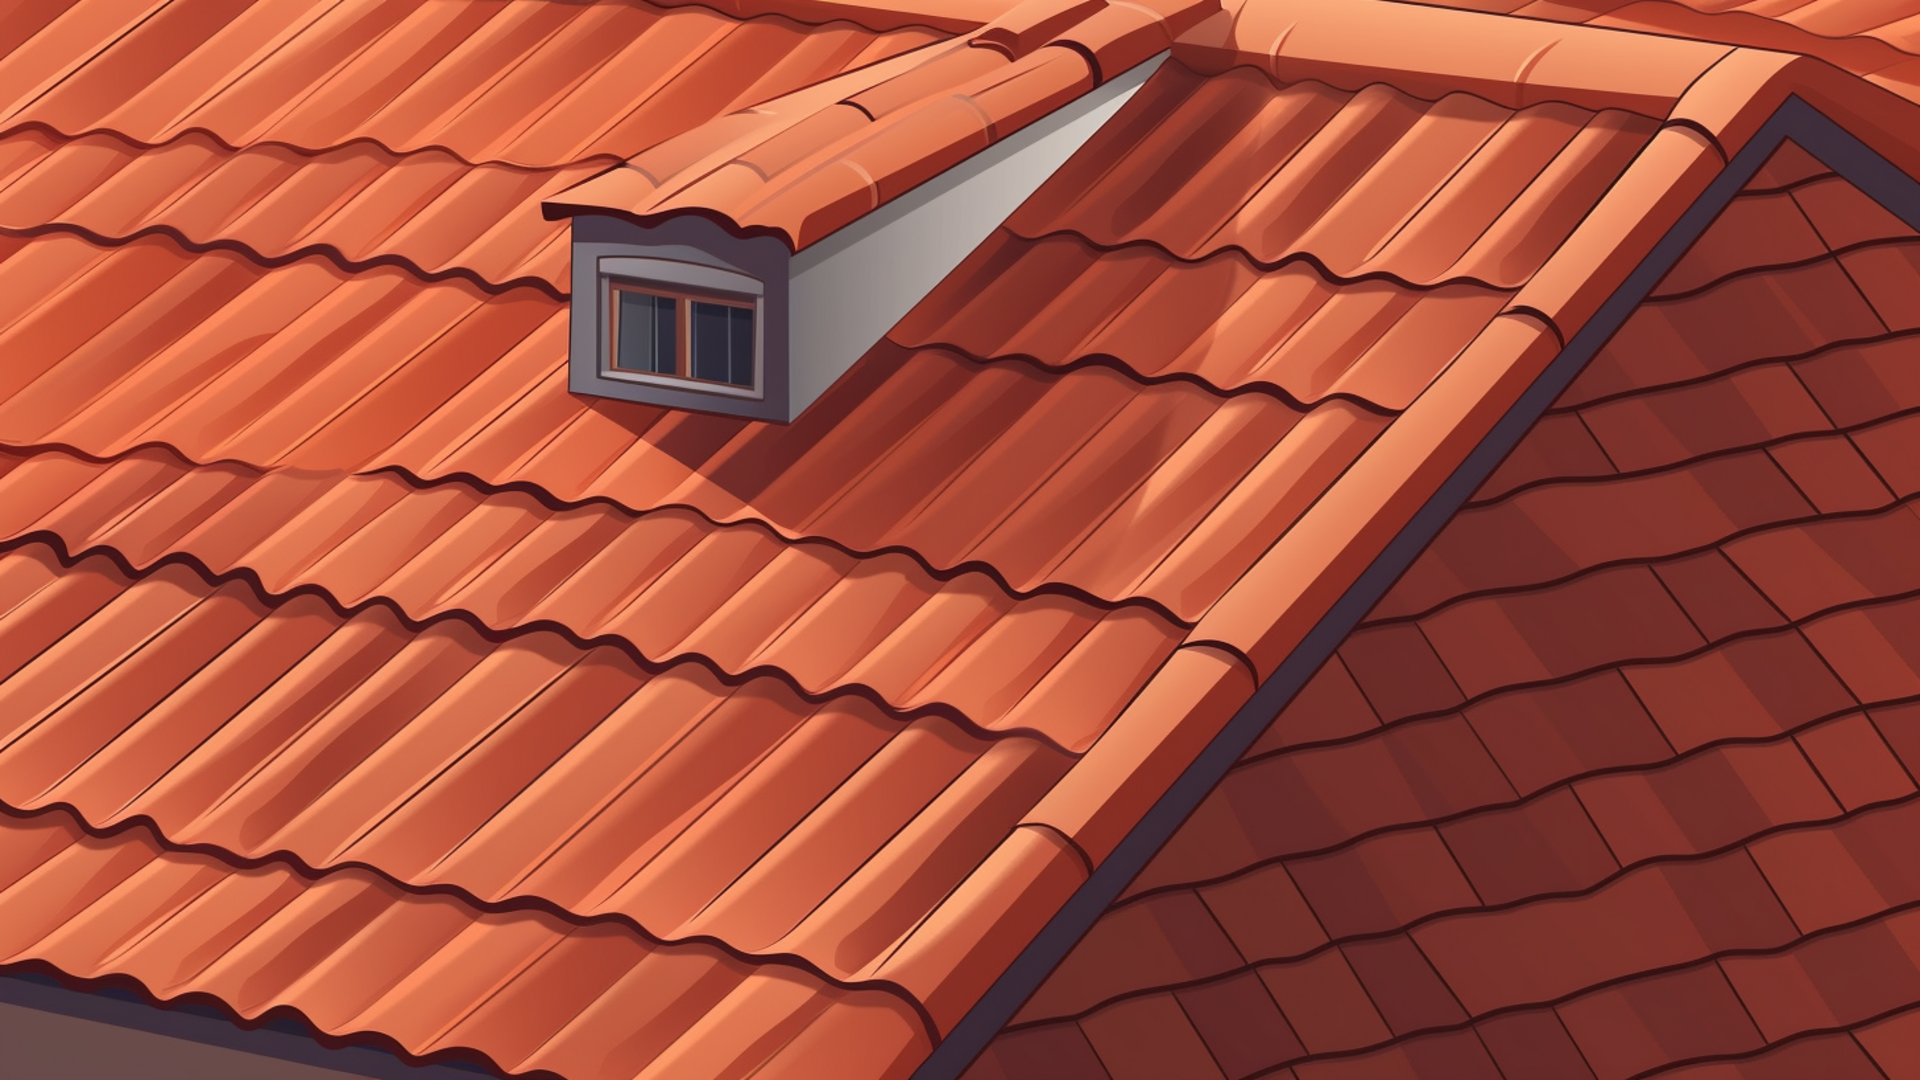 From Residential to Commercial: Pros and Cons of Expanding Your Roofing Business